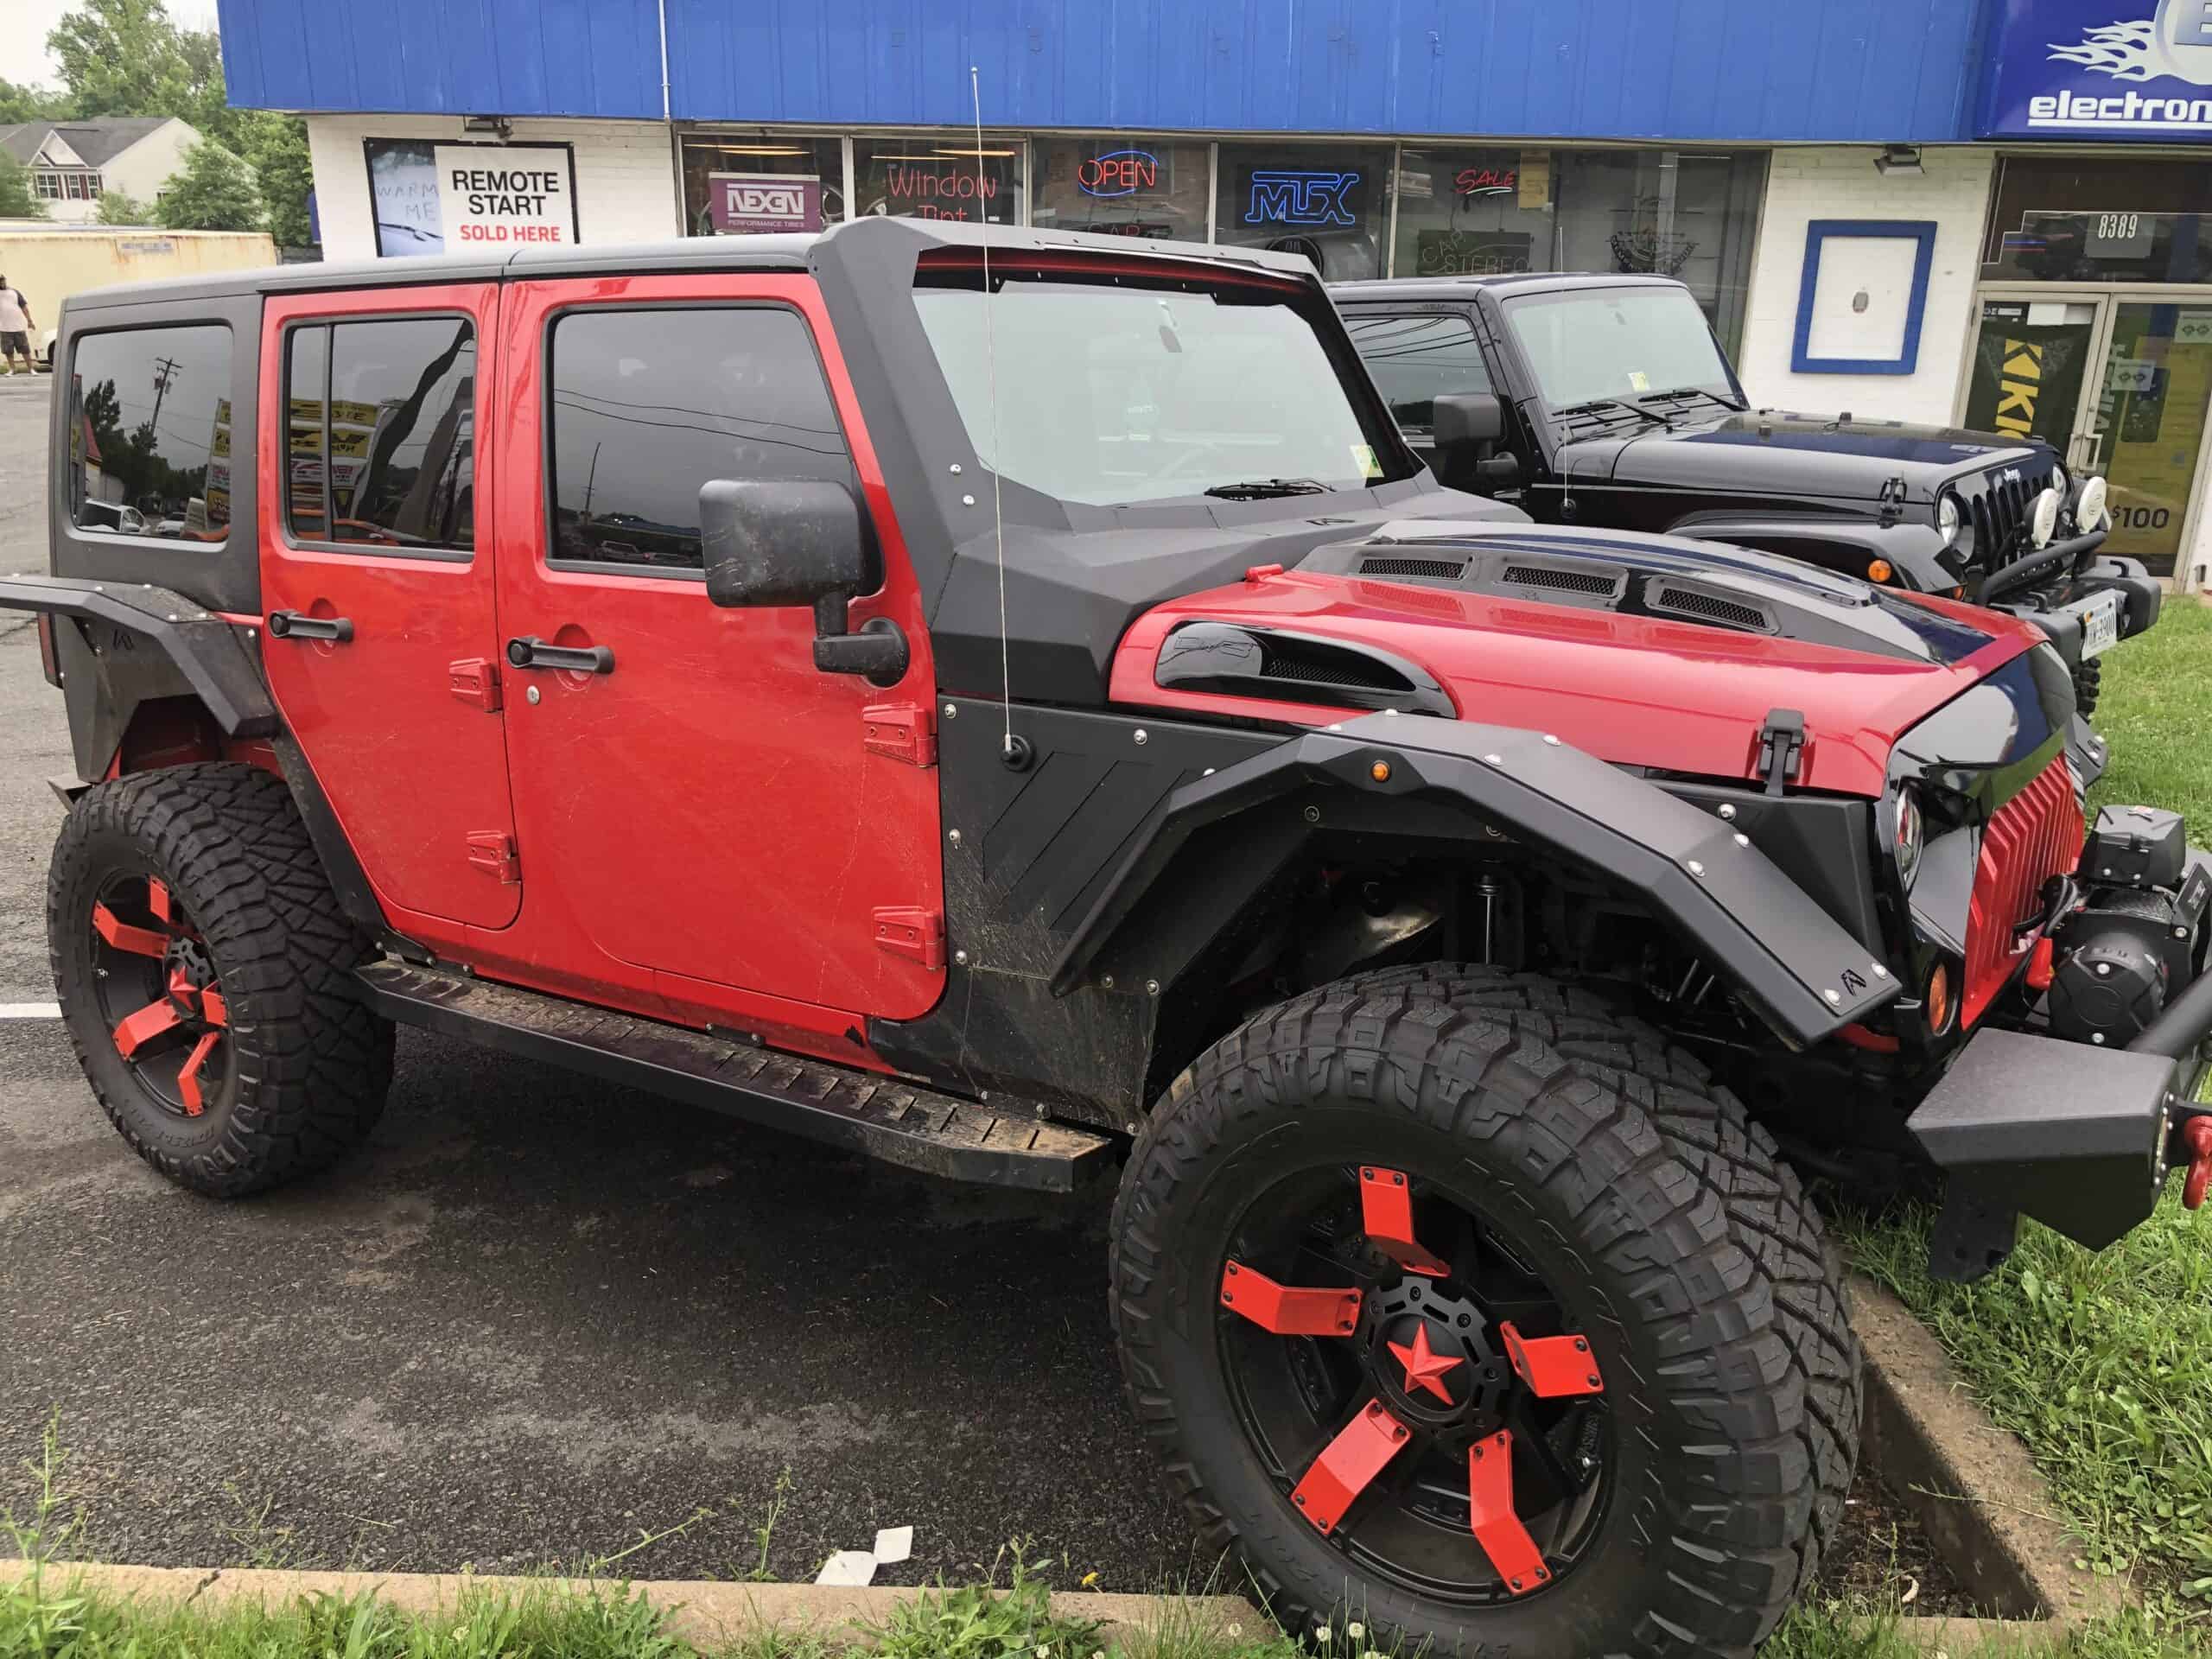 Red and black with tint windows, by Electronic Plus in Manassas 